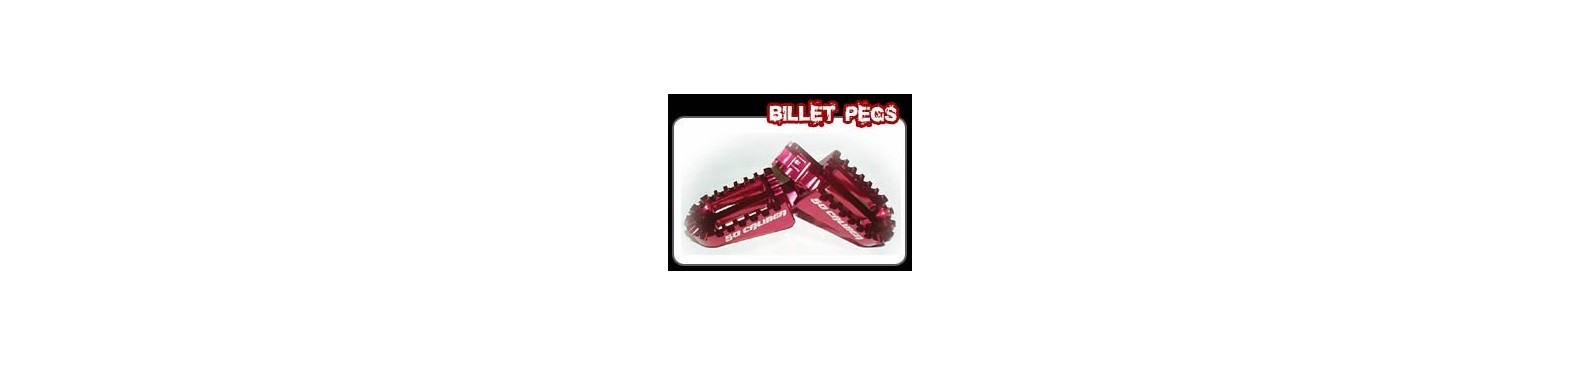 Accessories for Honda 50 pitbikes, gas caps, pegs, tall stands and more